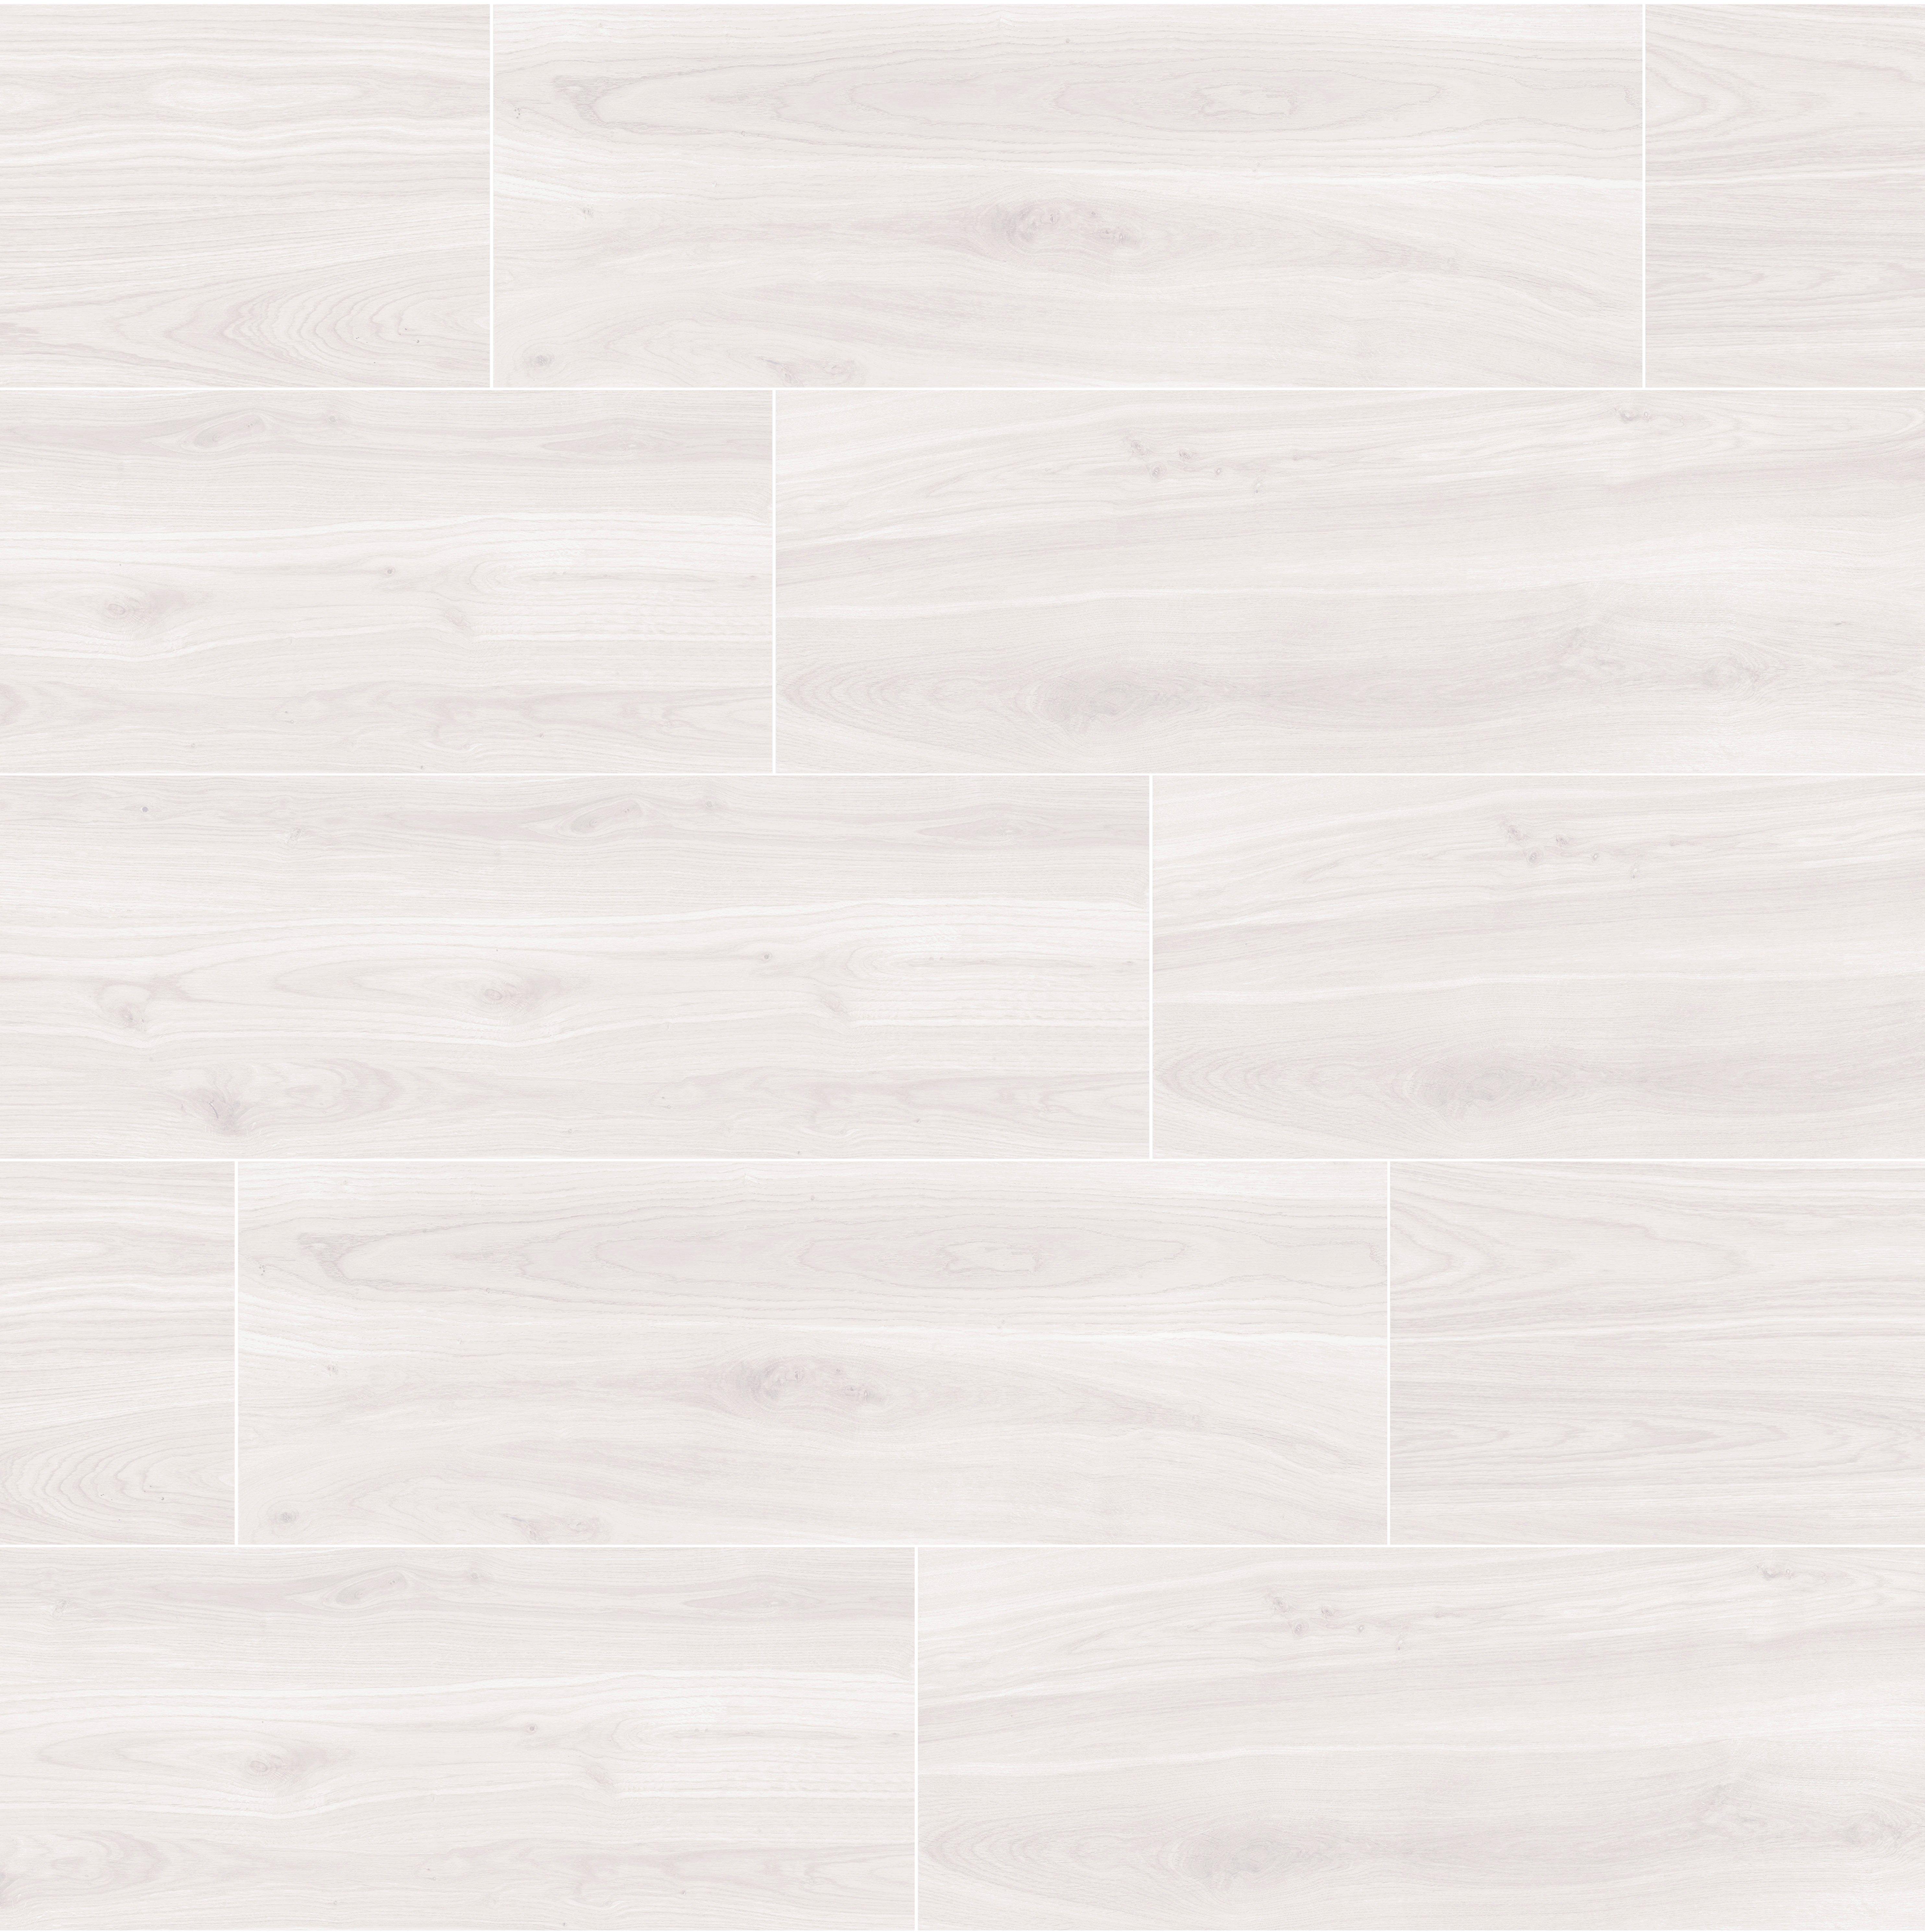 Wood-look Tile Flooring: How to Lay Tile professionally - Blog RUBI